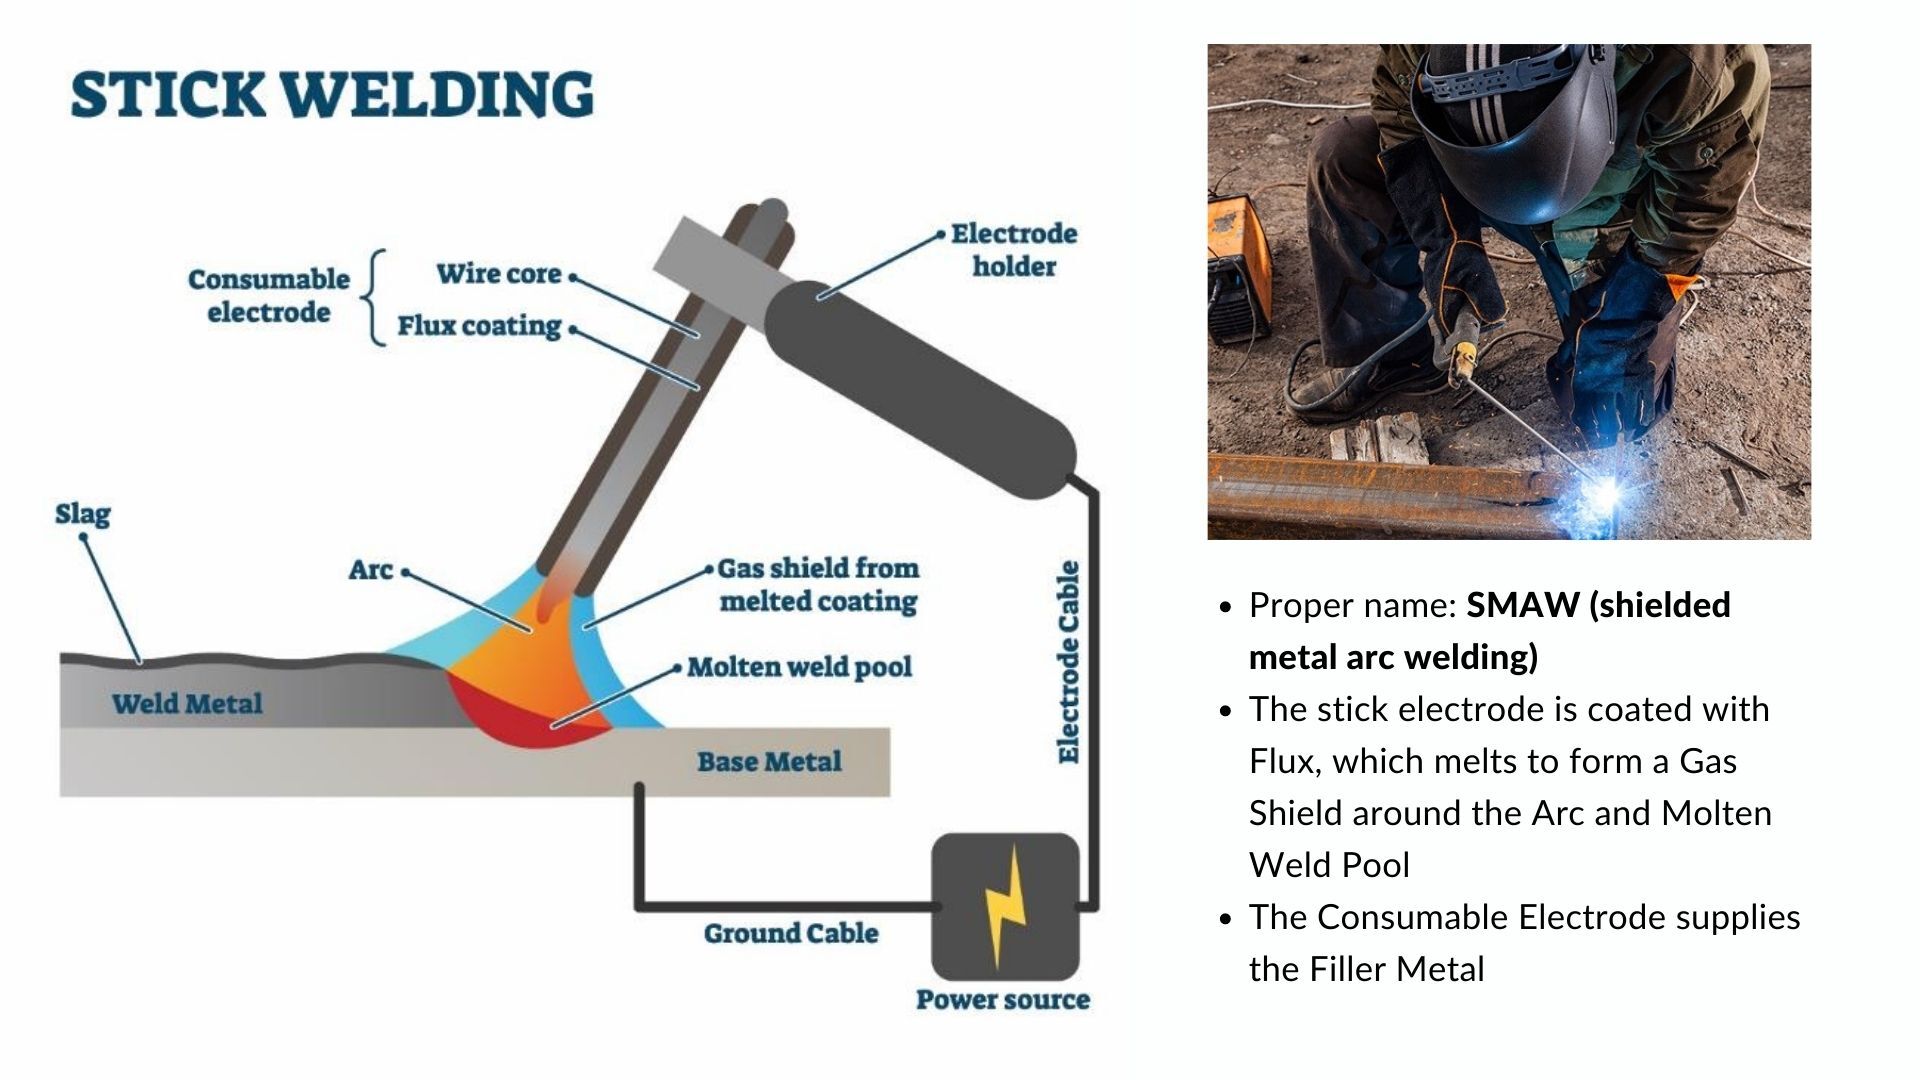 Image 3. An illustration of how Stick welding works. 